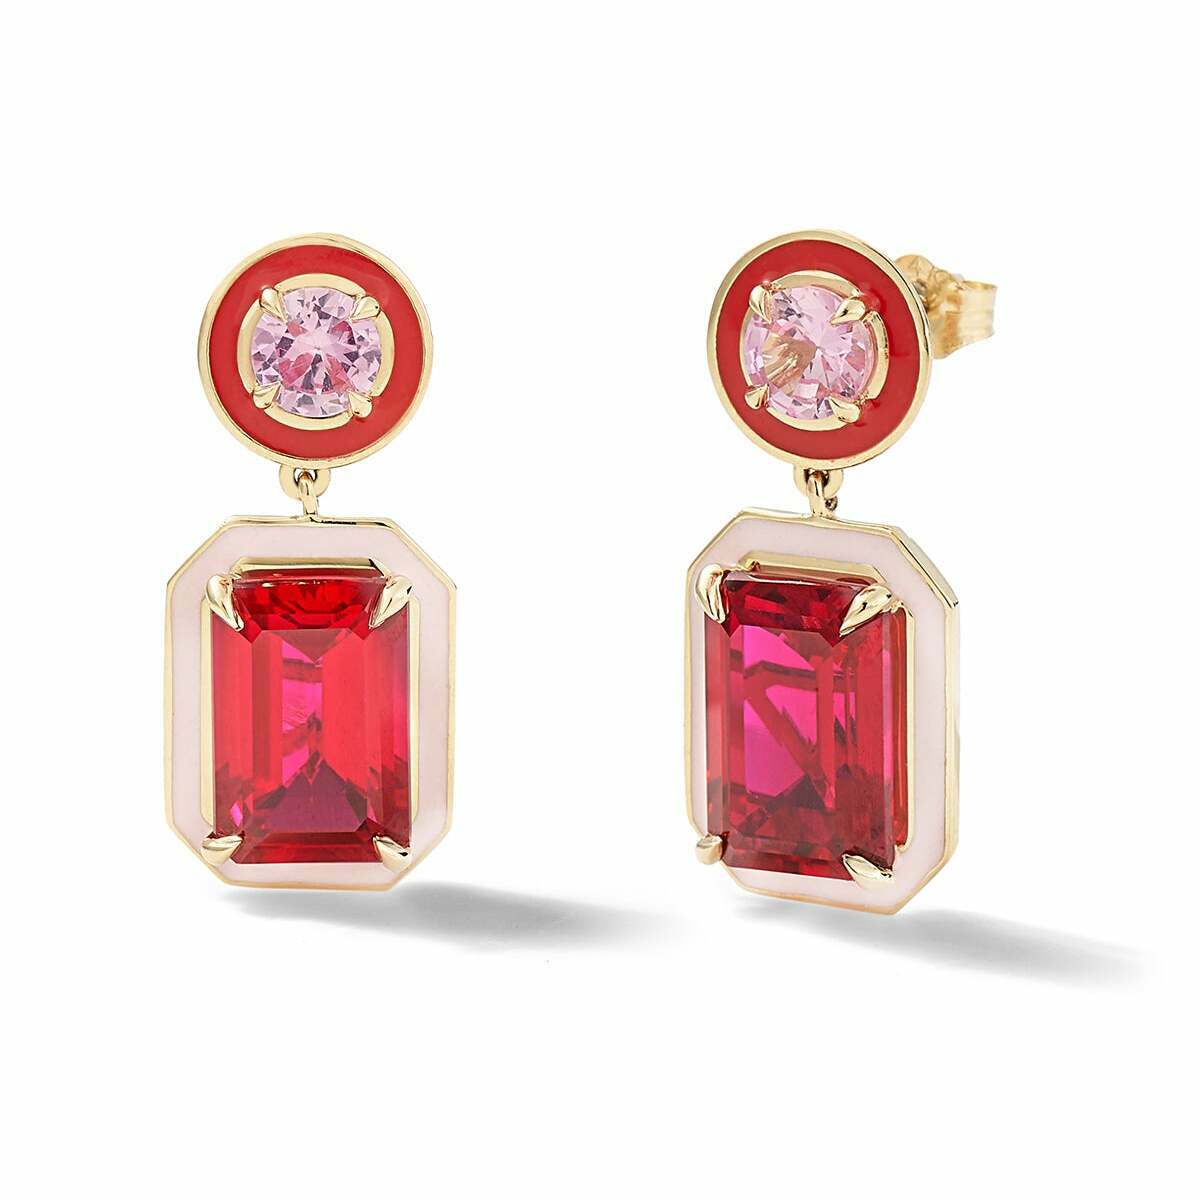 DOUBLE COCKTAIL DROPS 14 - carat gold and enamel earrings